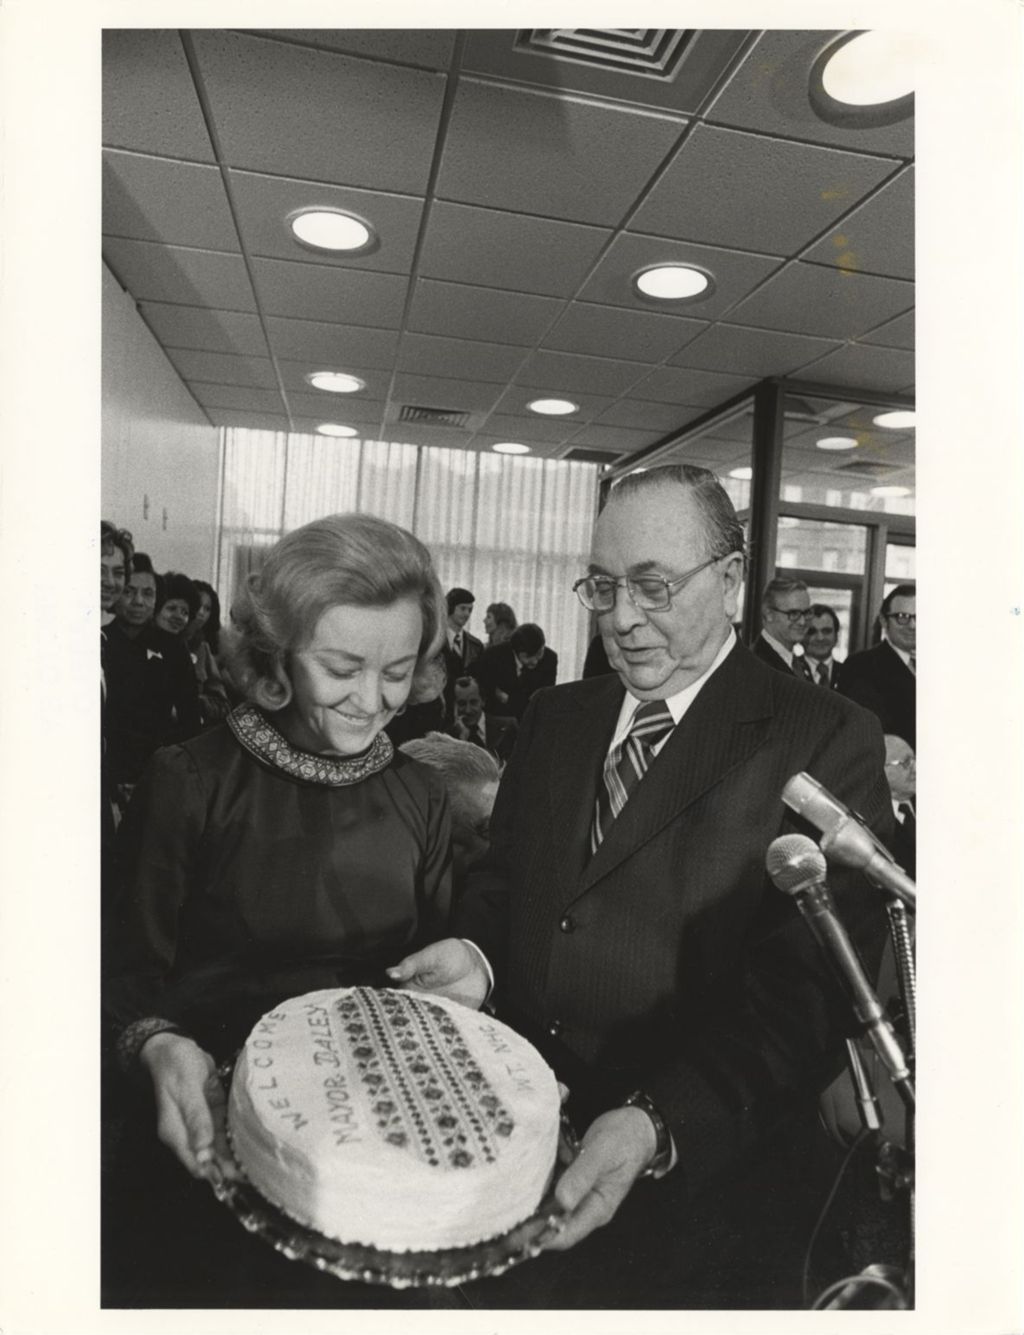 Miniature of Richard J. Daley accepts a decorated cake